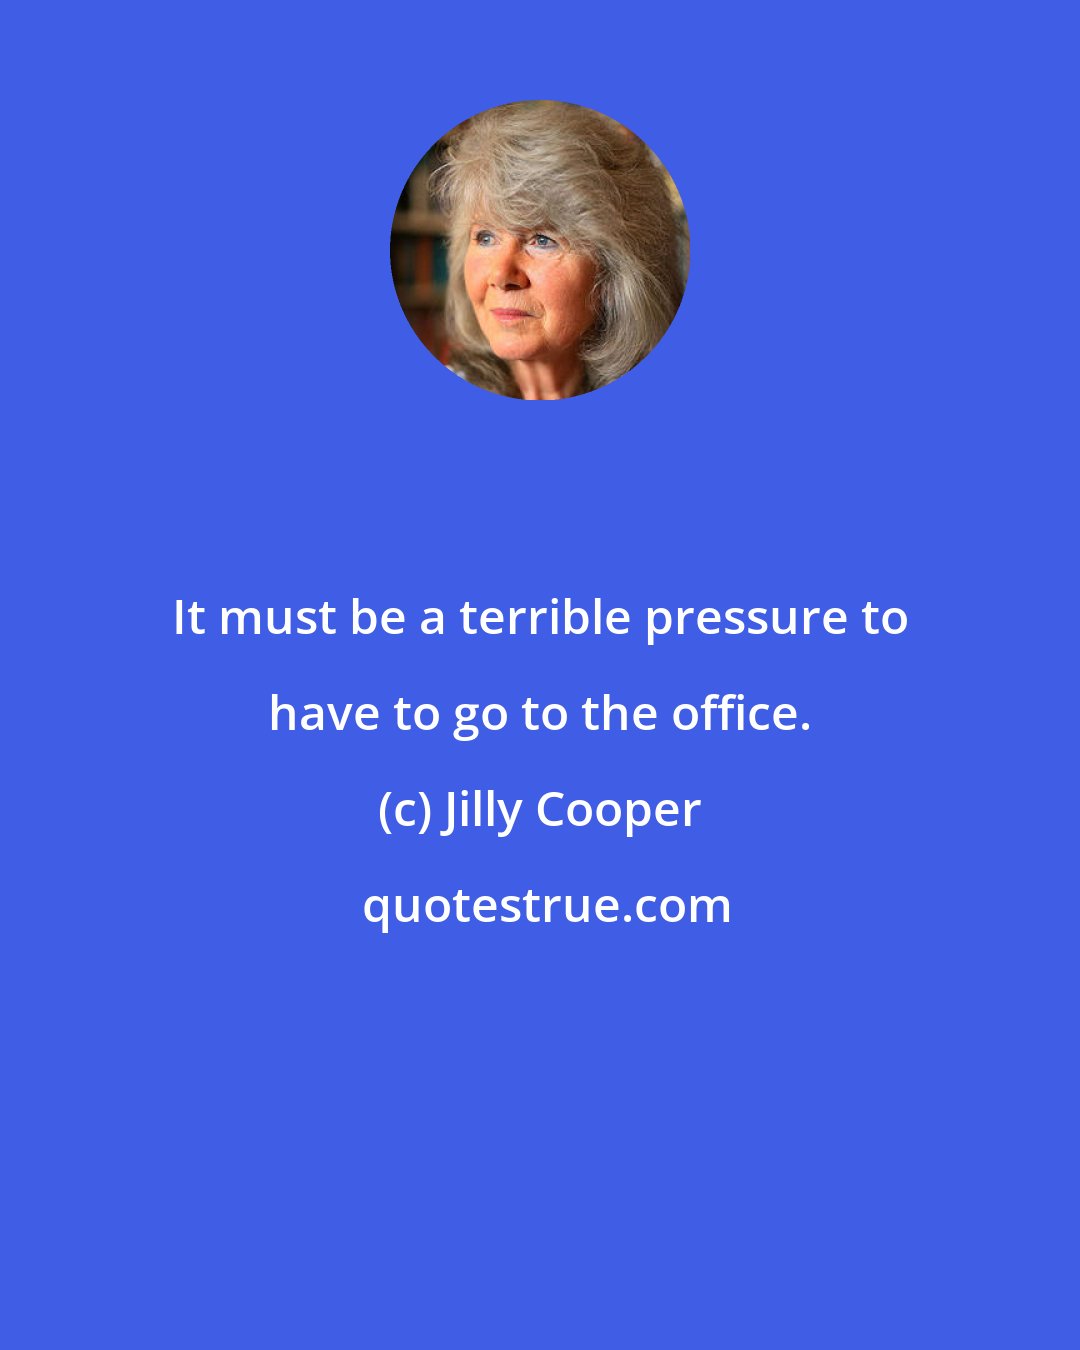 Jilly Cooper: It must be a terrible pressure to have to go to the office.